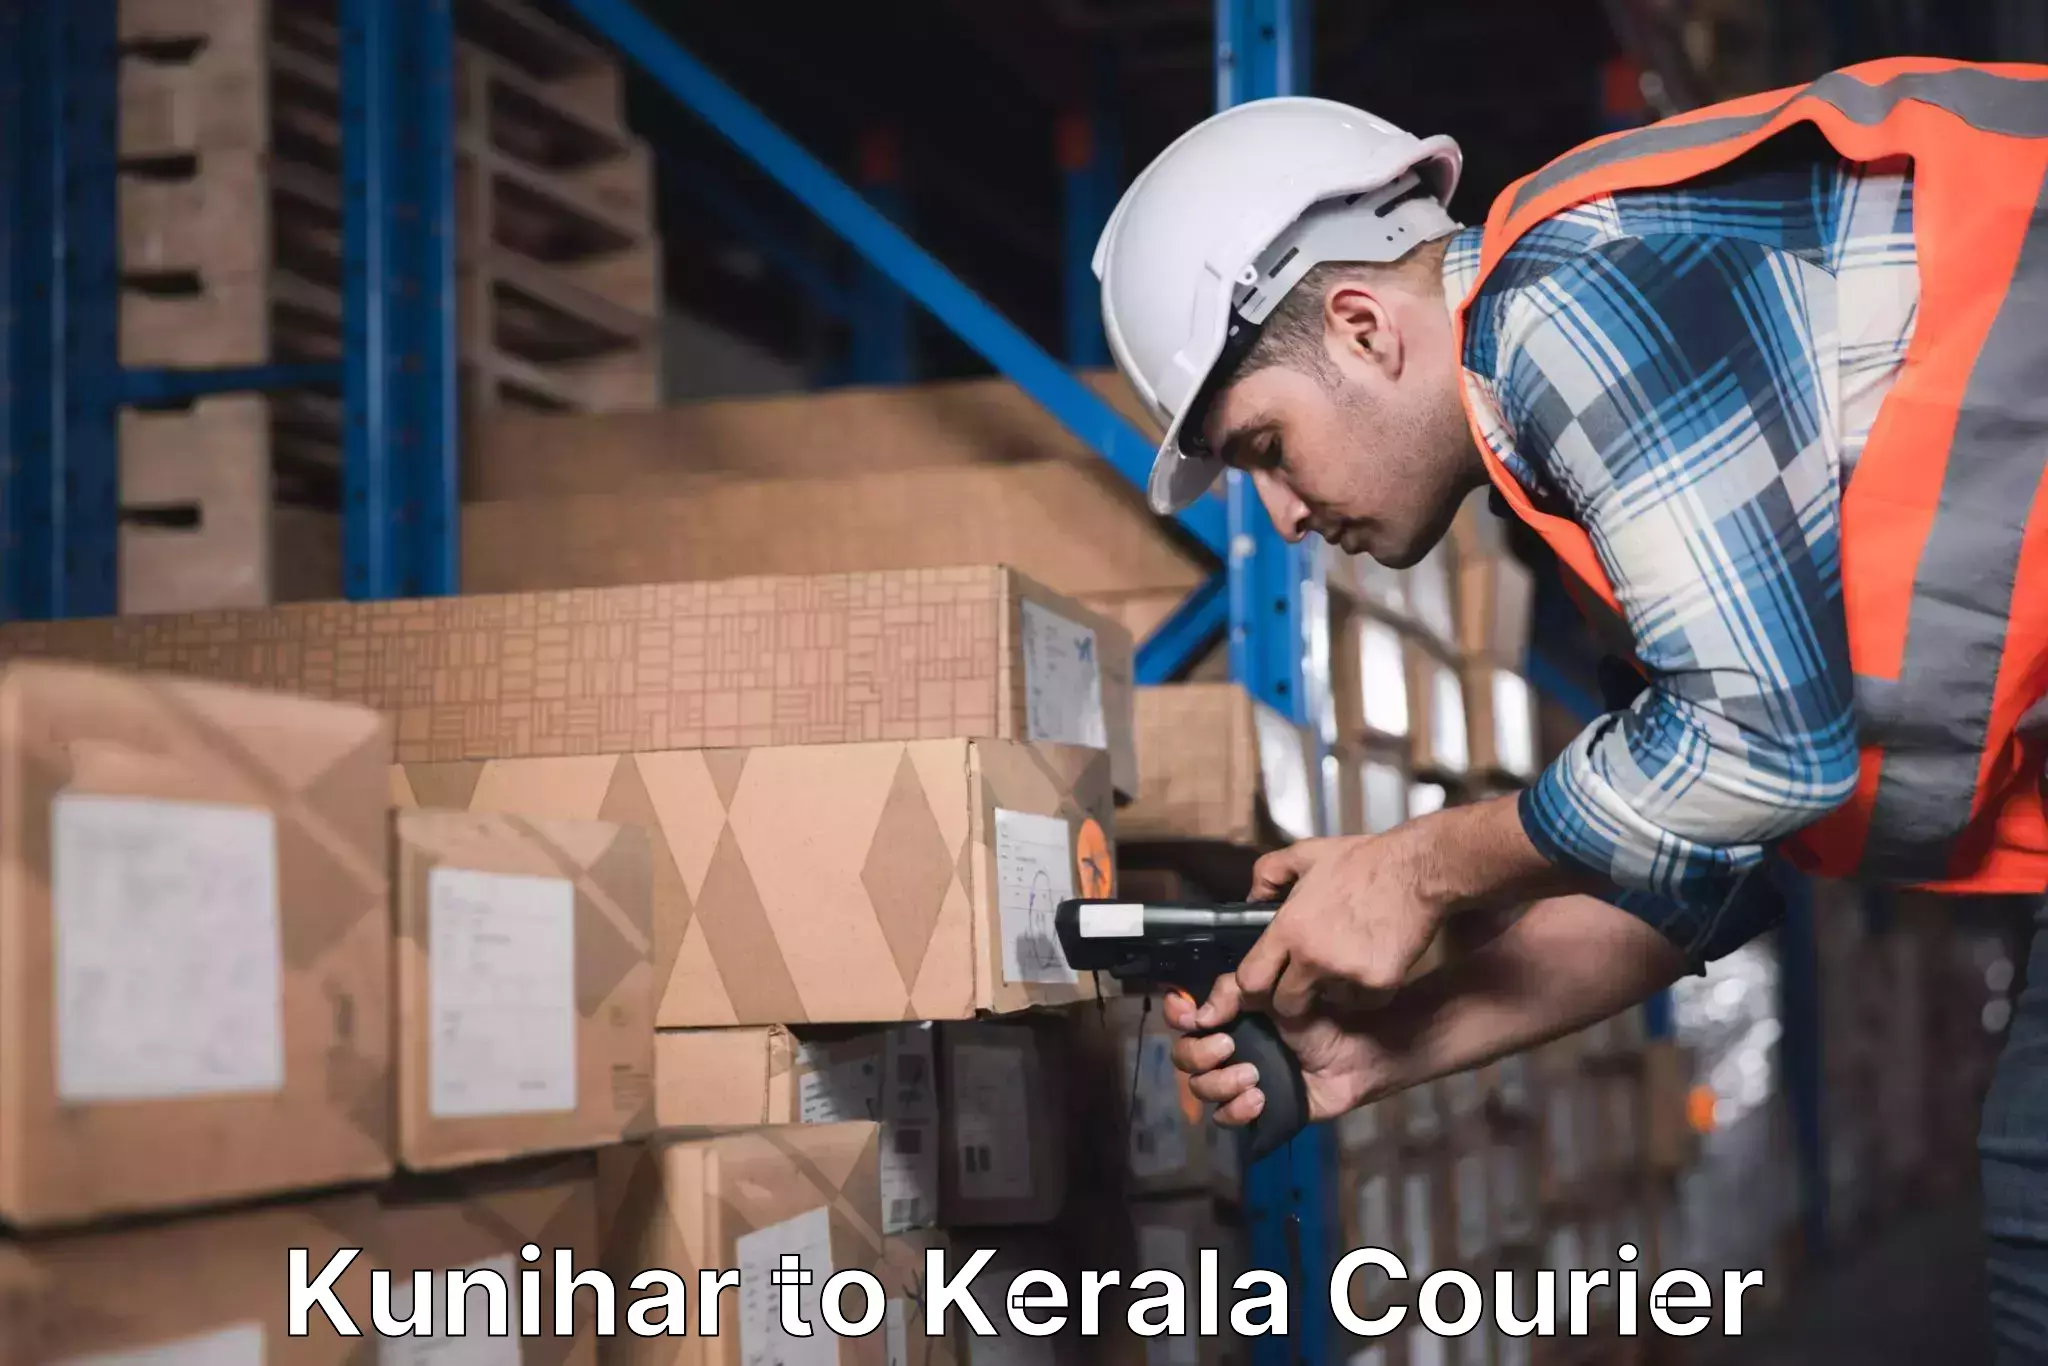 Express package services Kunihar to Cochin Port Kochi